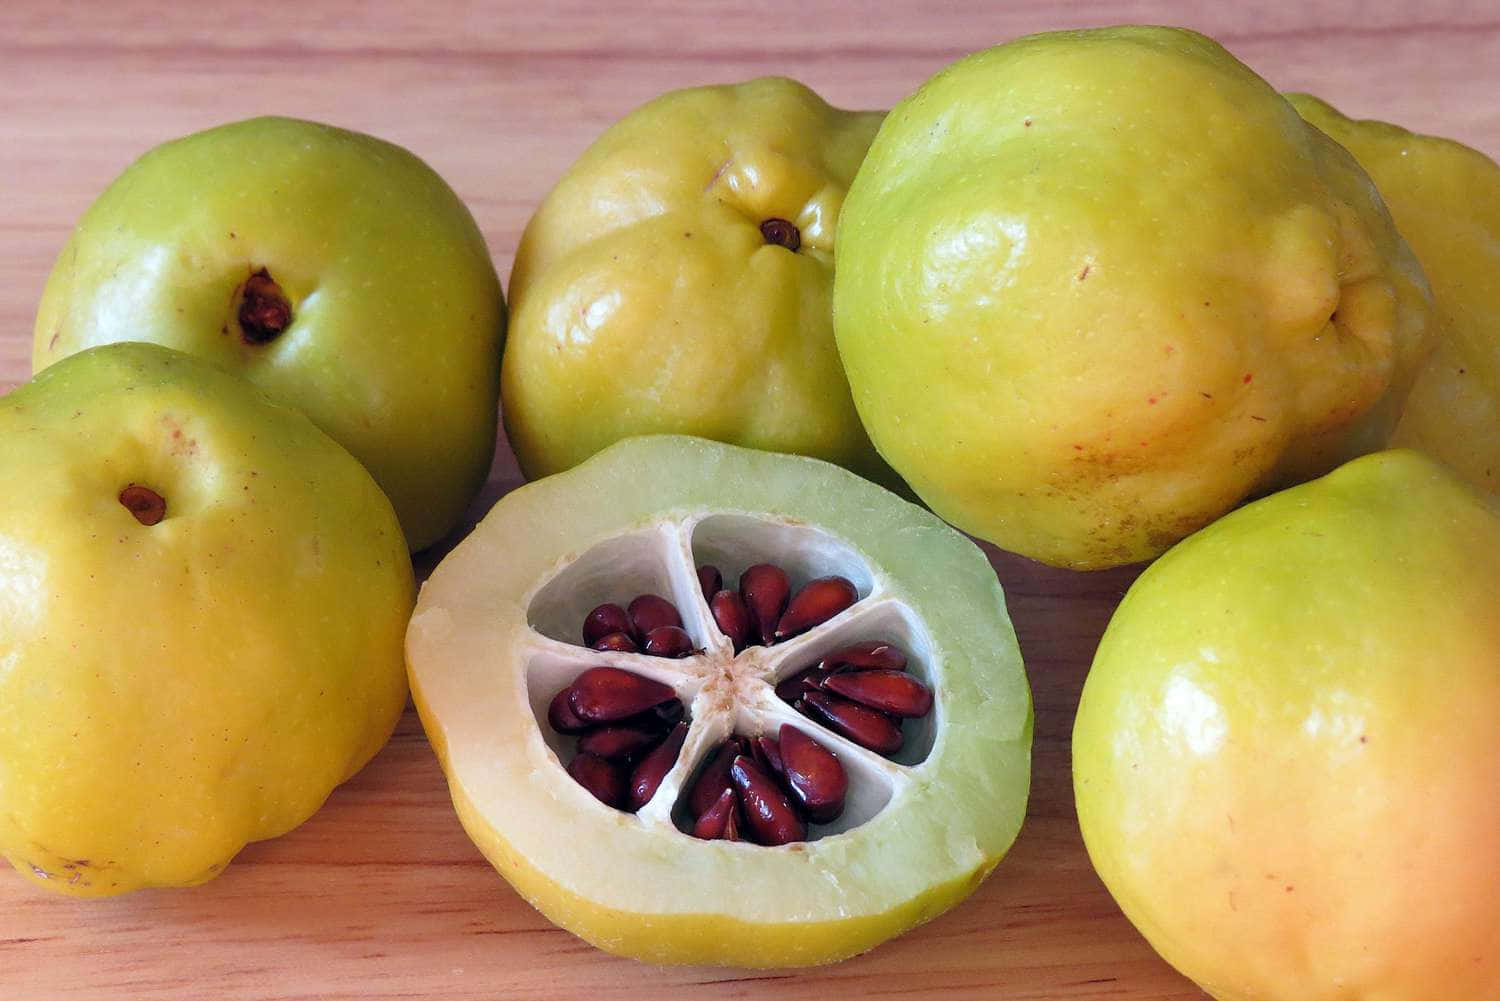 A yellow quince fruit with a cheerful expression